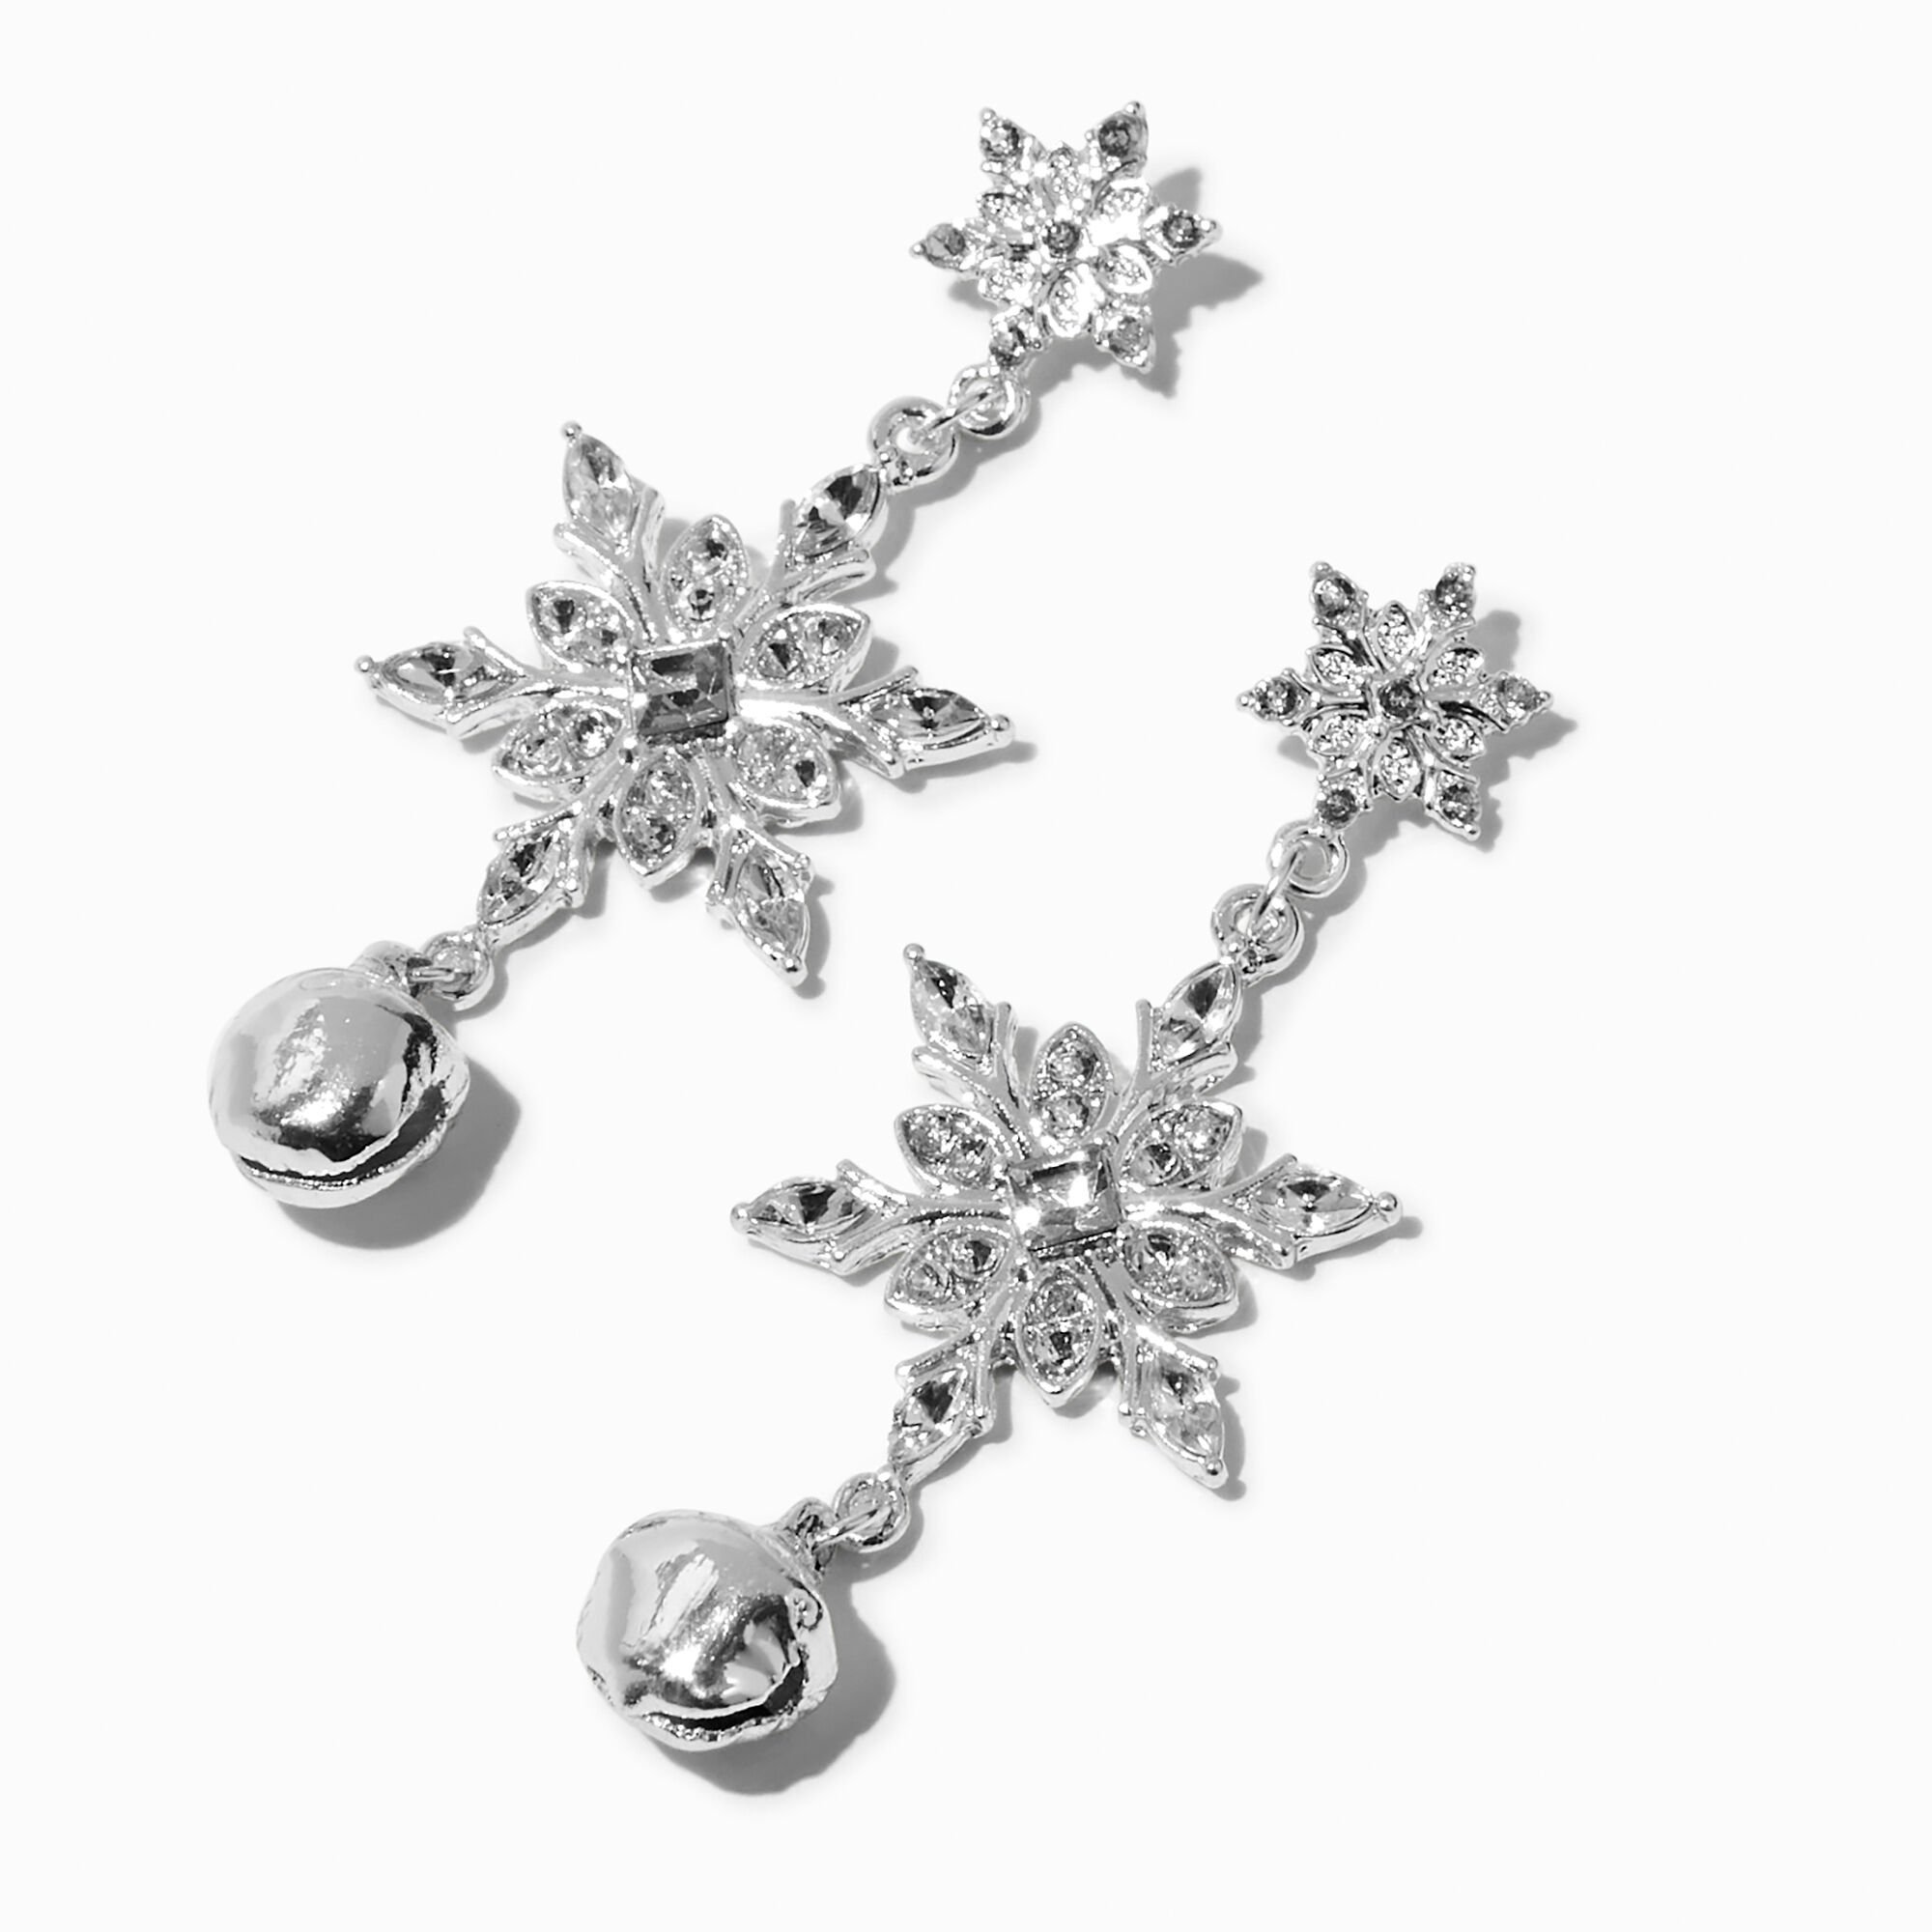 View Claires Holiday Bells Snowflakes Tone 2 Drop Earrings Silver information